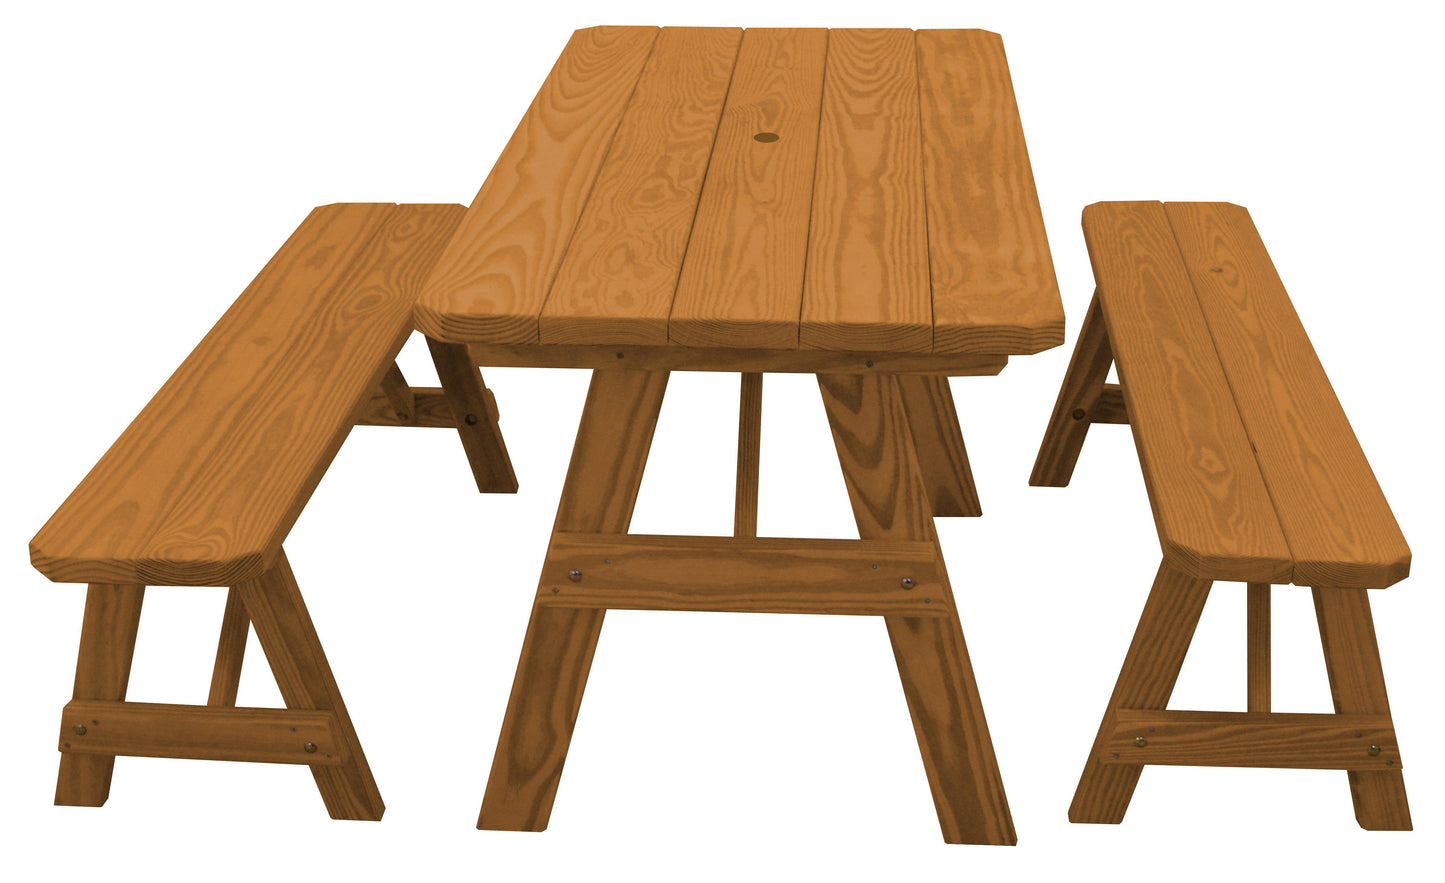 A&L Furniture Co. Yellow Pine Traditional 5' Table with 2 Benches - LEAD TIME TO SHIP 10 BUSINESS DAYS